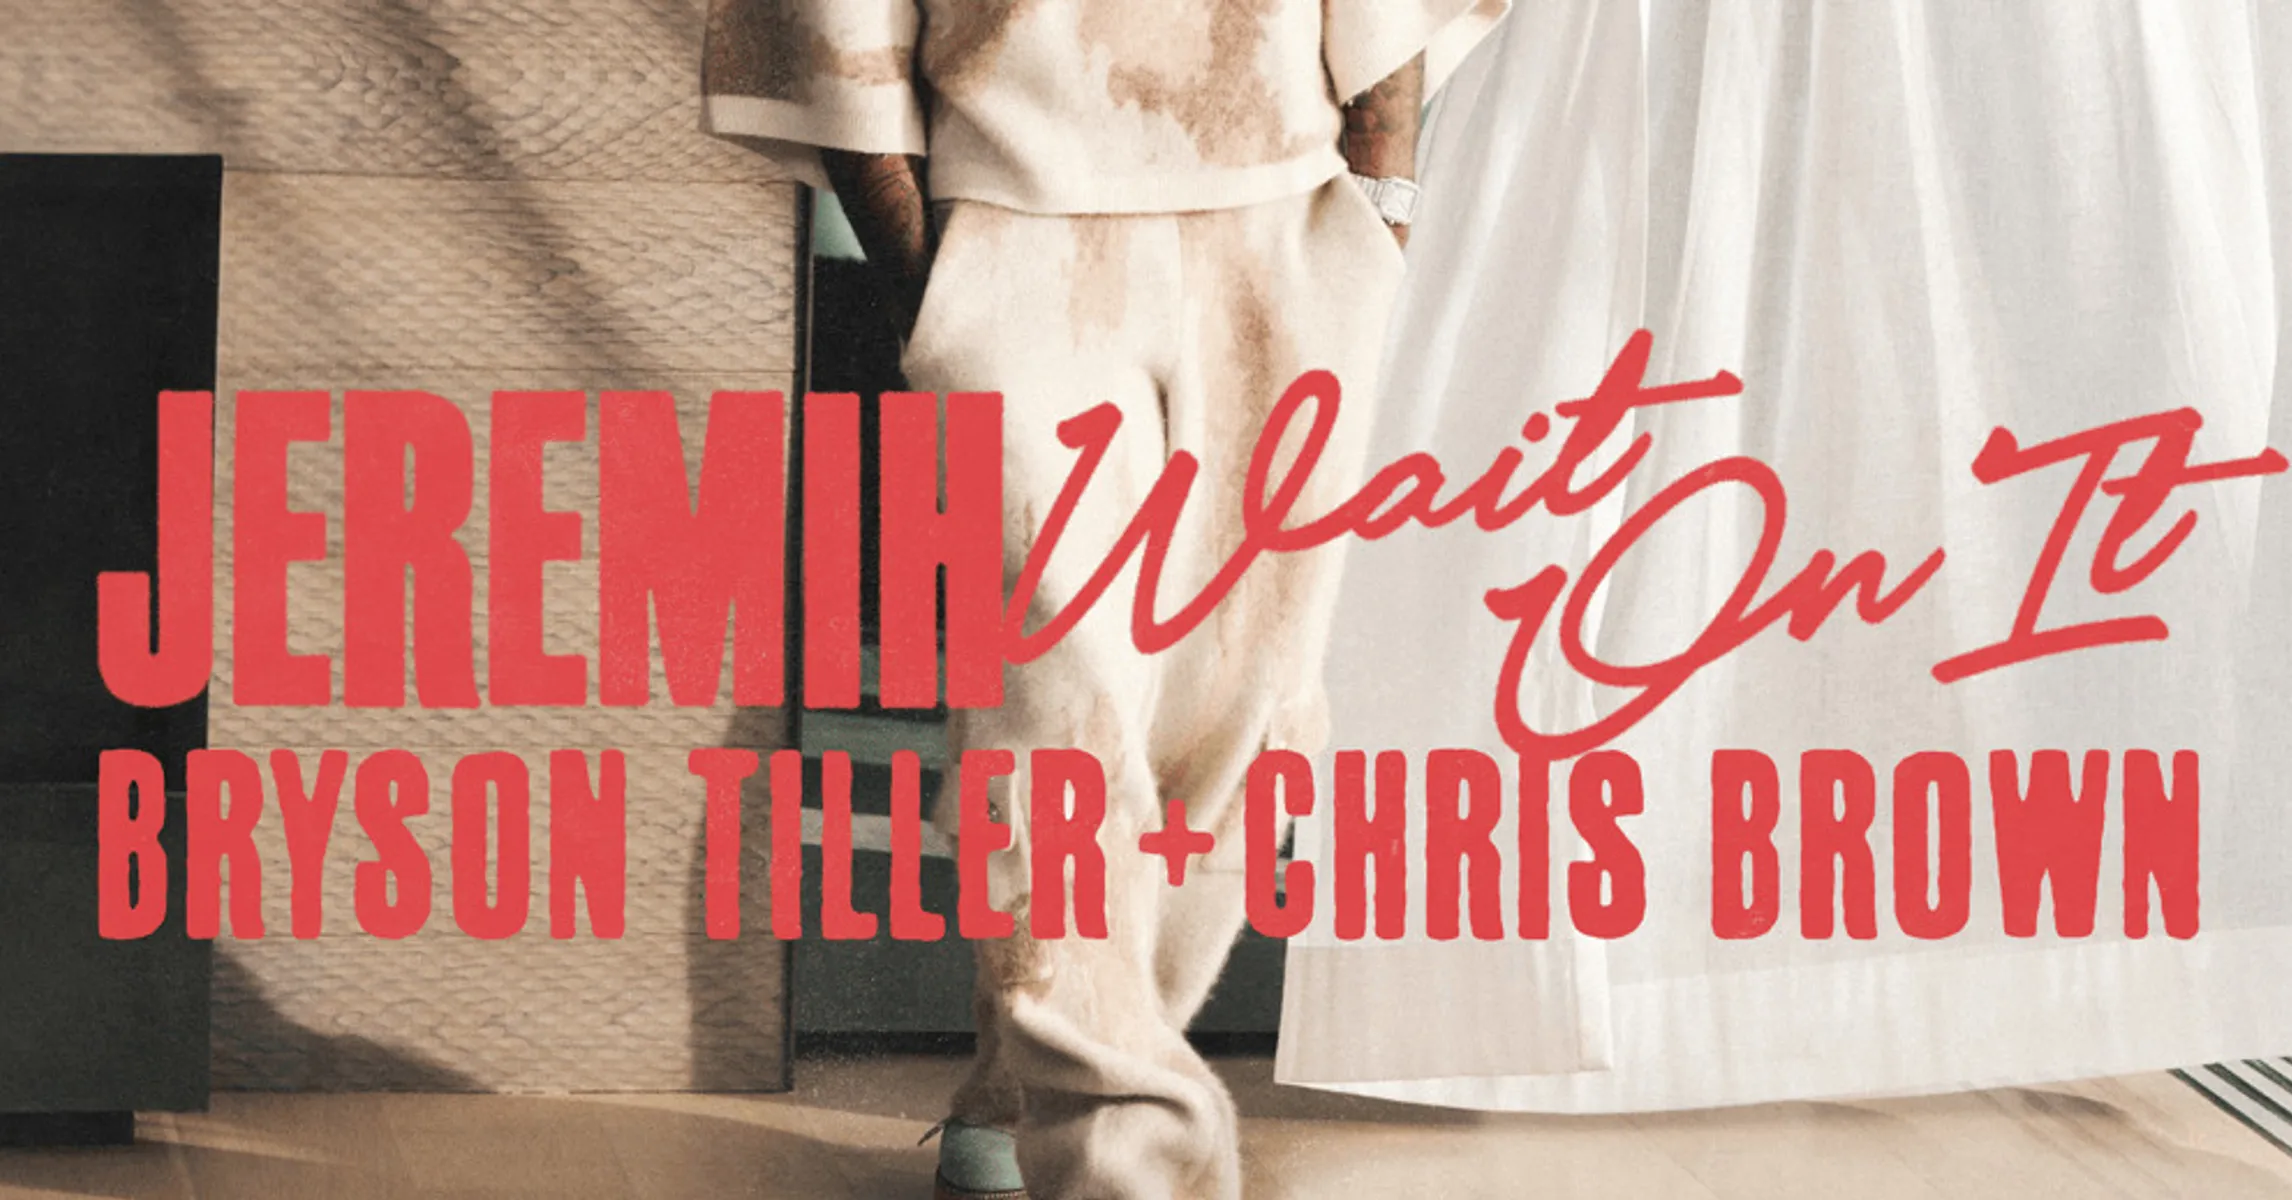 Jeremih recruits R&B colleagues Bryson Tiller and Chris Brown for “Wait On It”